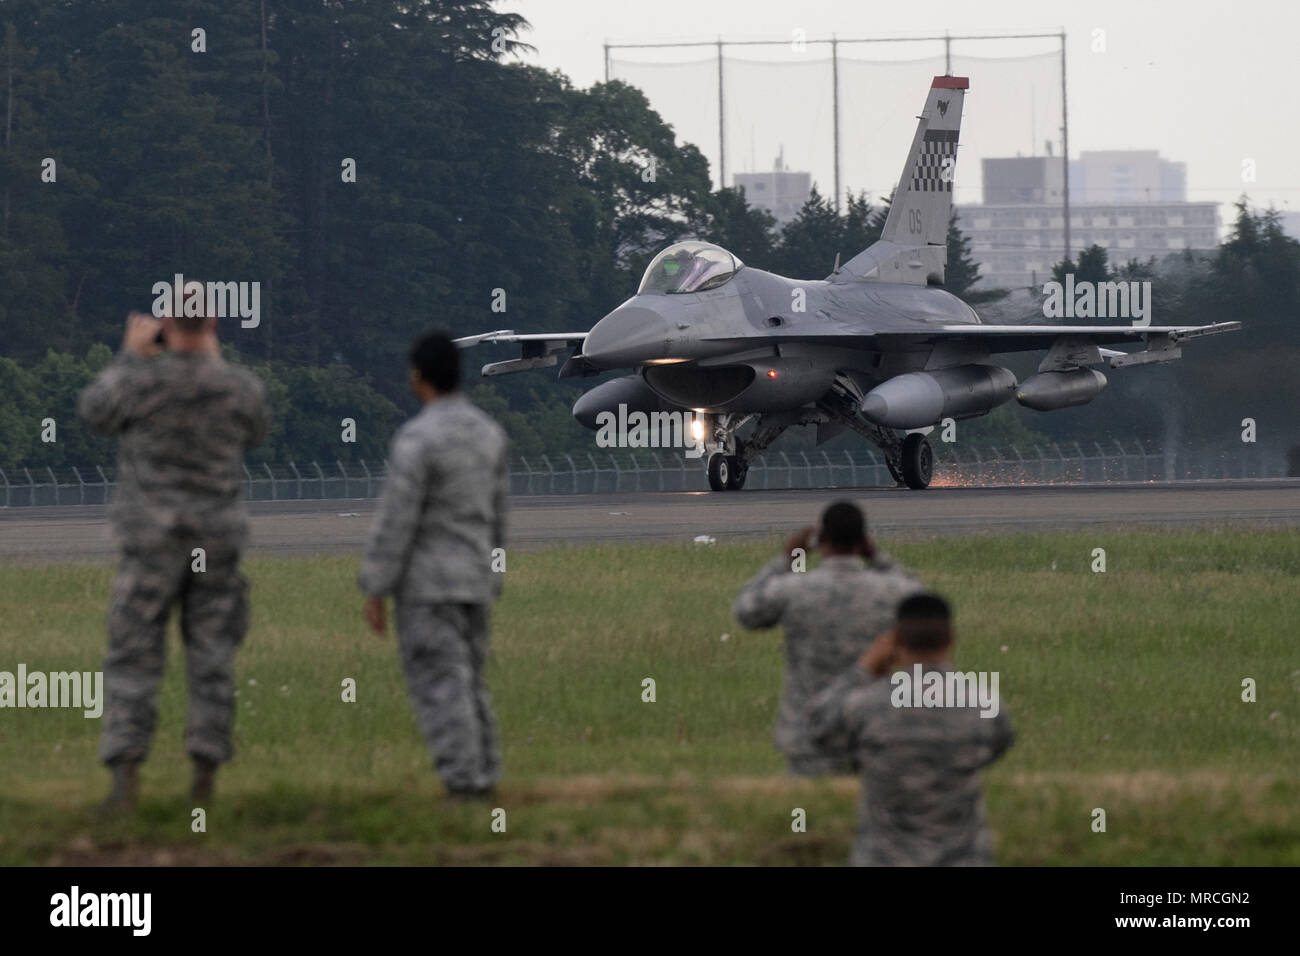 Airmen with the 374th Civil Engineer Squadron observe an F-16 Fighting Falcon test an Aircraft Arresting System, June 1, 2017, Yokota Air Base, Japan. The AAS is required to be tested annually. Airmen from the 374 CES and 374th Operations Support Squadron are responsible for setting up the system and logging any deficiencies during the test. (U.S. Air Force photo by Yasuo Osakabe) Stock Photo